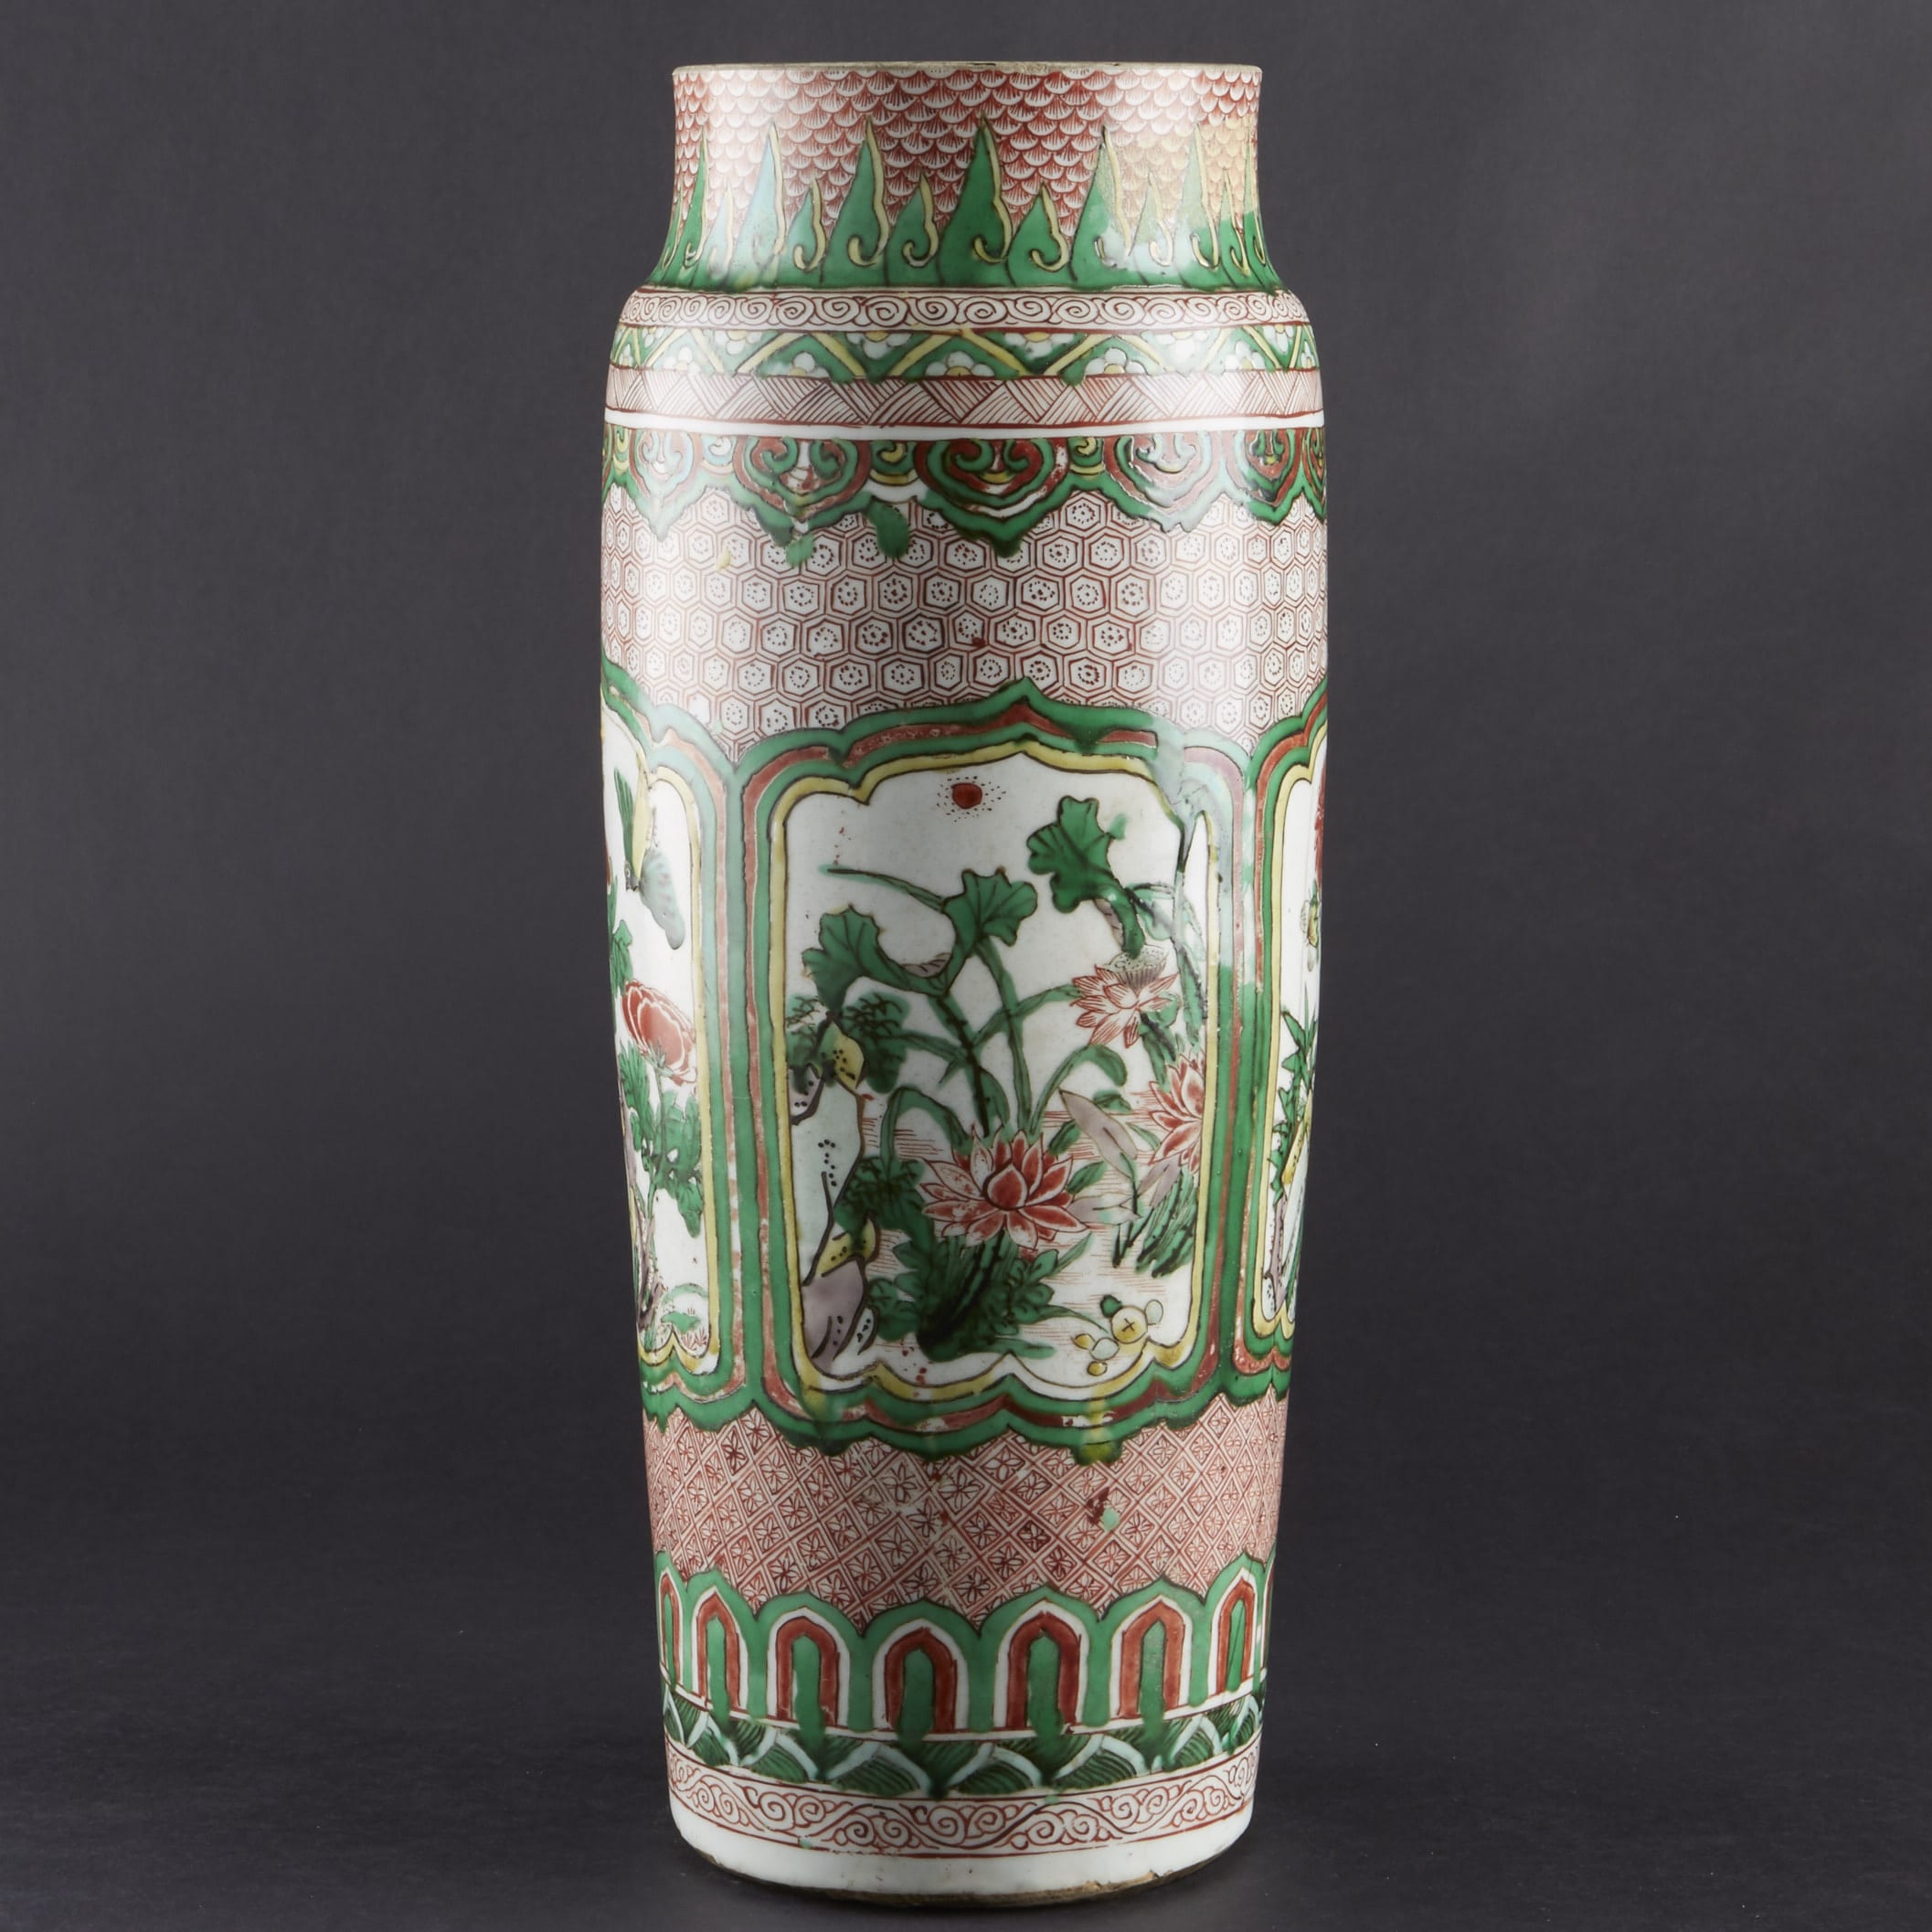 Lot 058: 17th c. Wucai Porcelain Famille Verte Vase on Wooden Stand